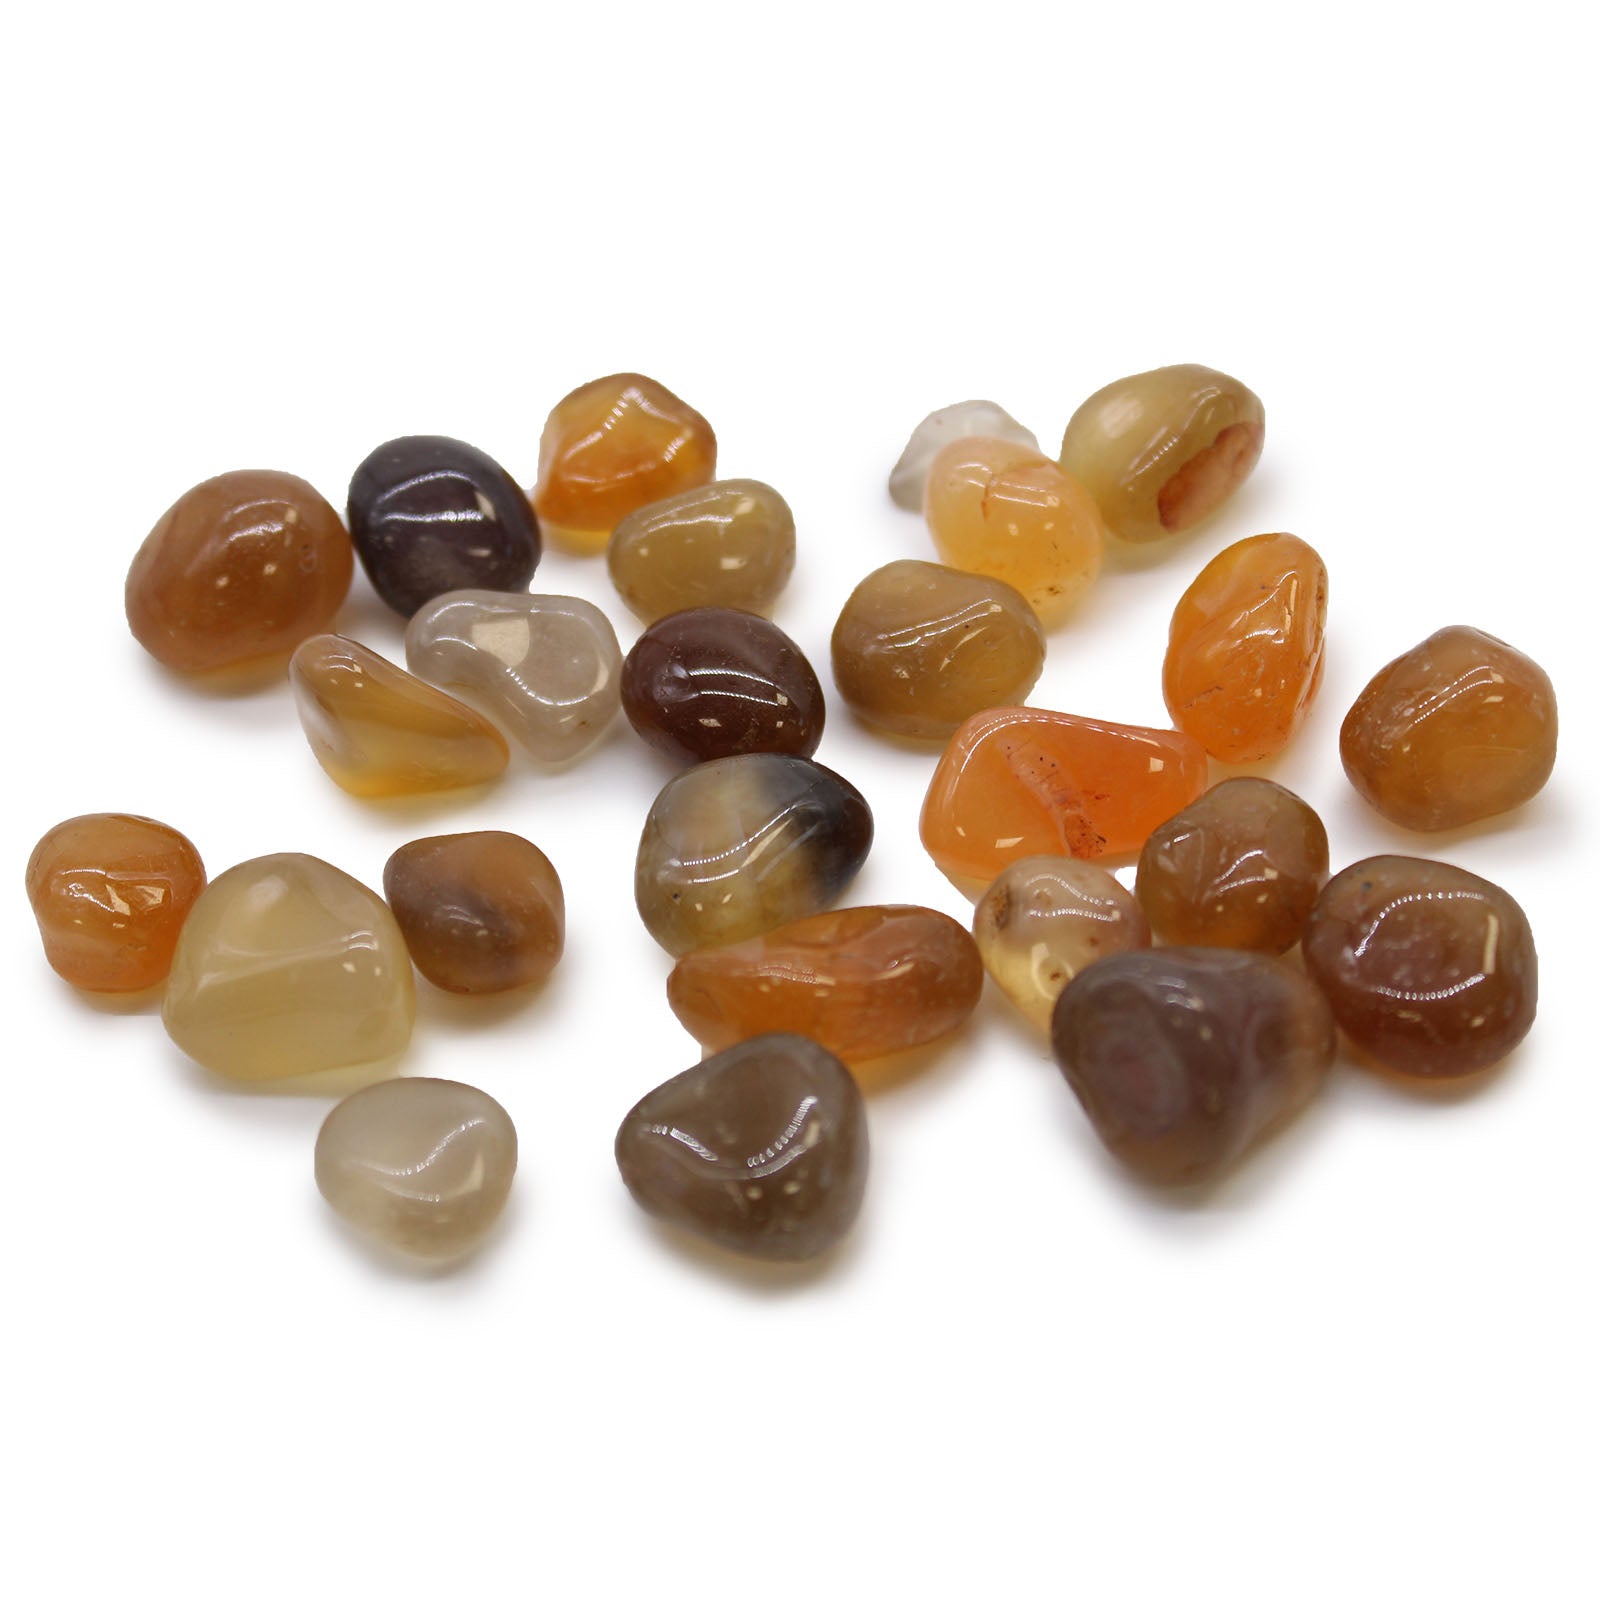 View Small African Tumble Stones Carnelian Agate Mozambique information